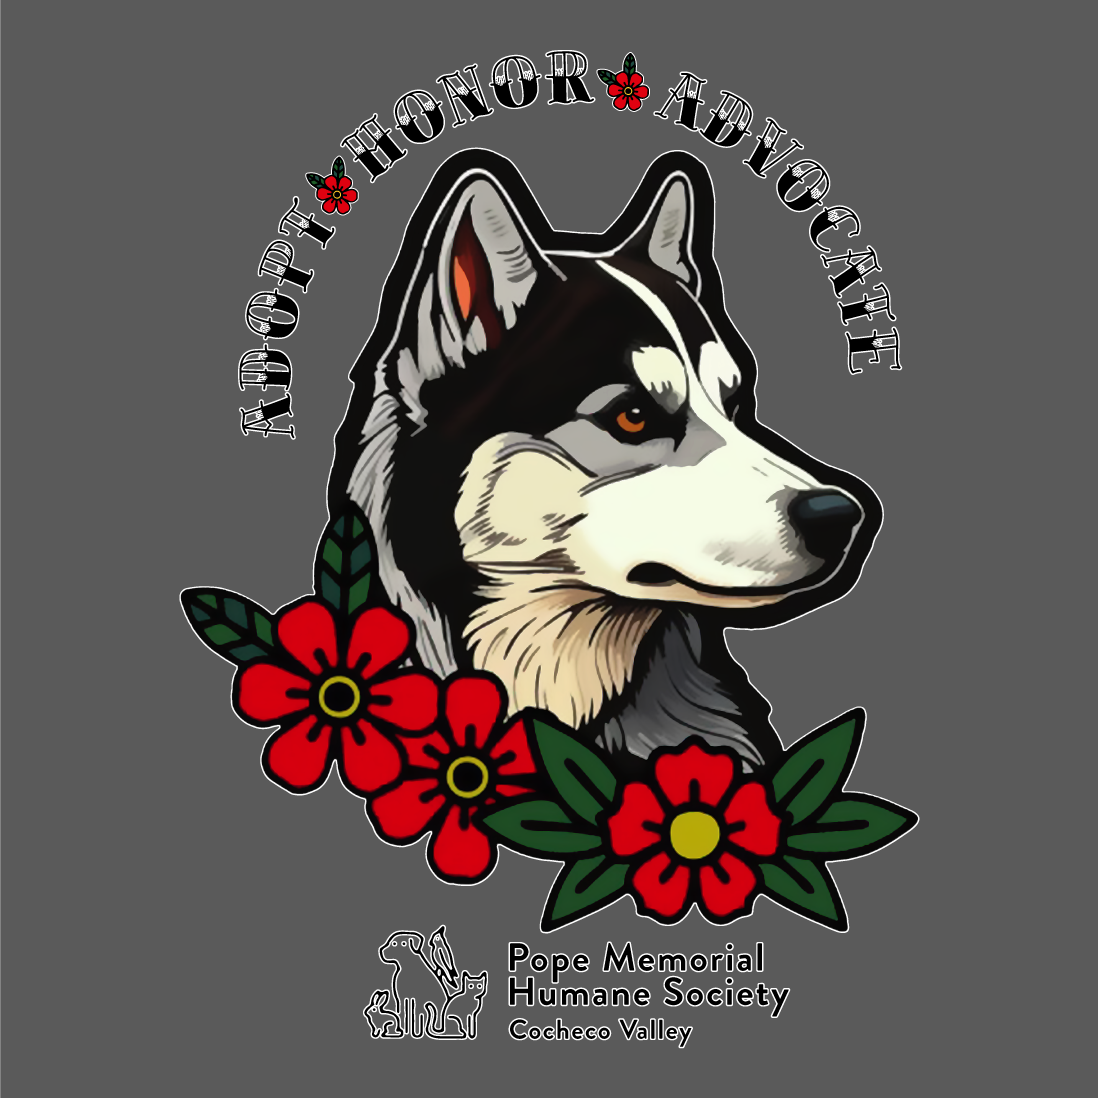 Have a Heart for Huskies! shirt design - zoomed